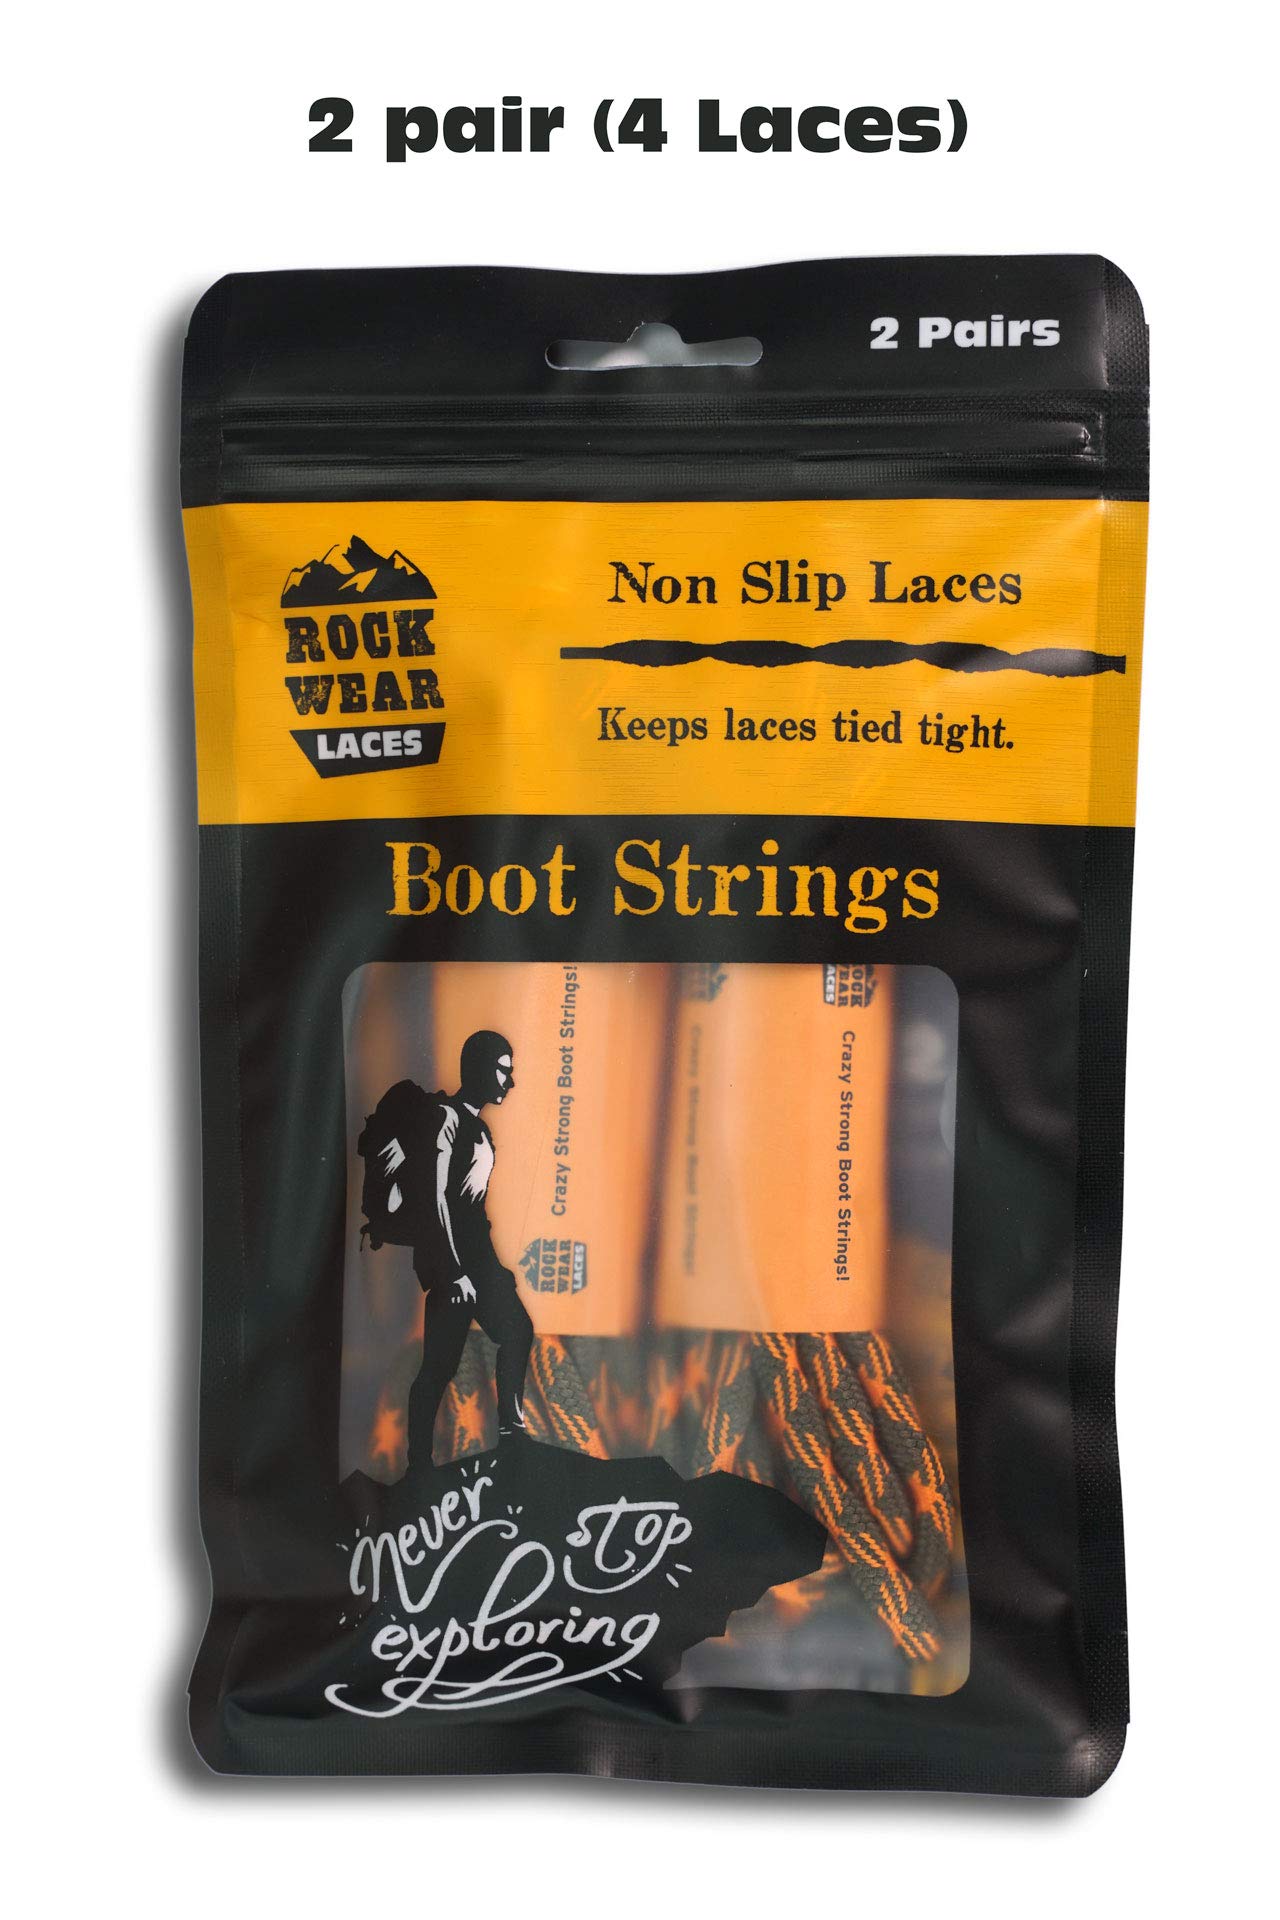 ROCKWEAR (2) PAIR NON SLIP HIKING BOOT LACES Hiking Boot Work Boot